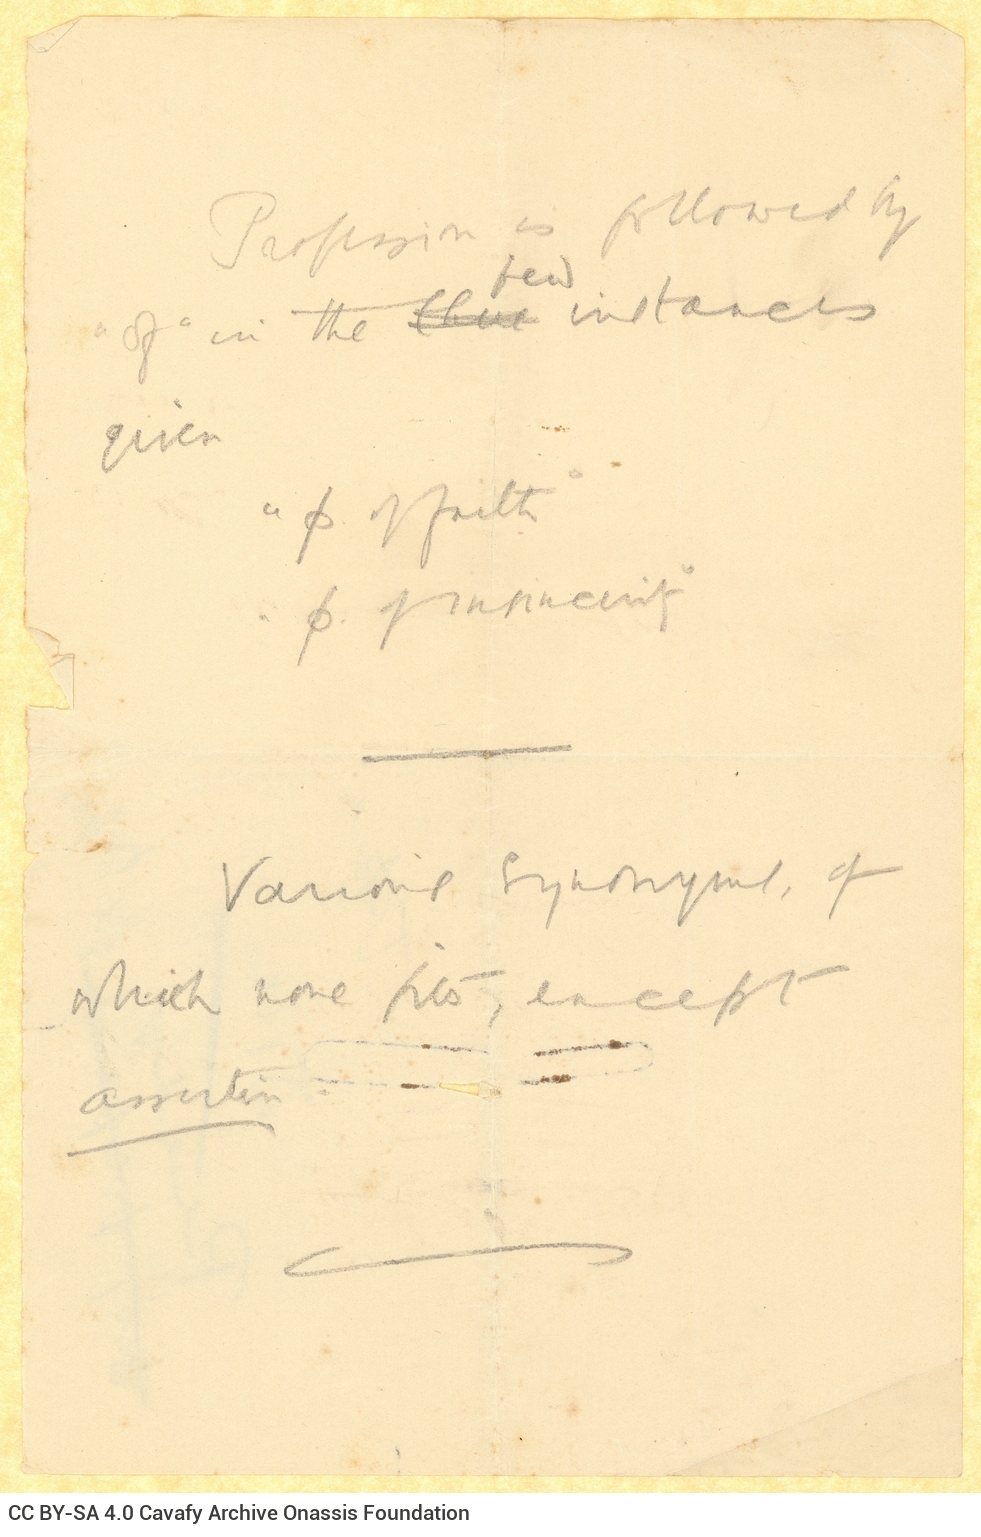 Handwritten English translation of the poem "Of the Jews (50 A.D.)" by G. Valassopoulo on one side of a sheet; handwritten